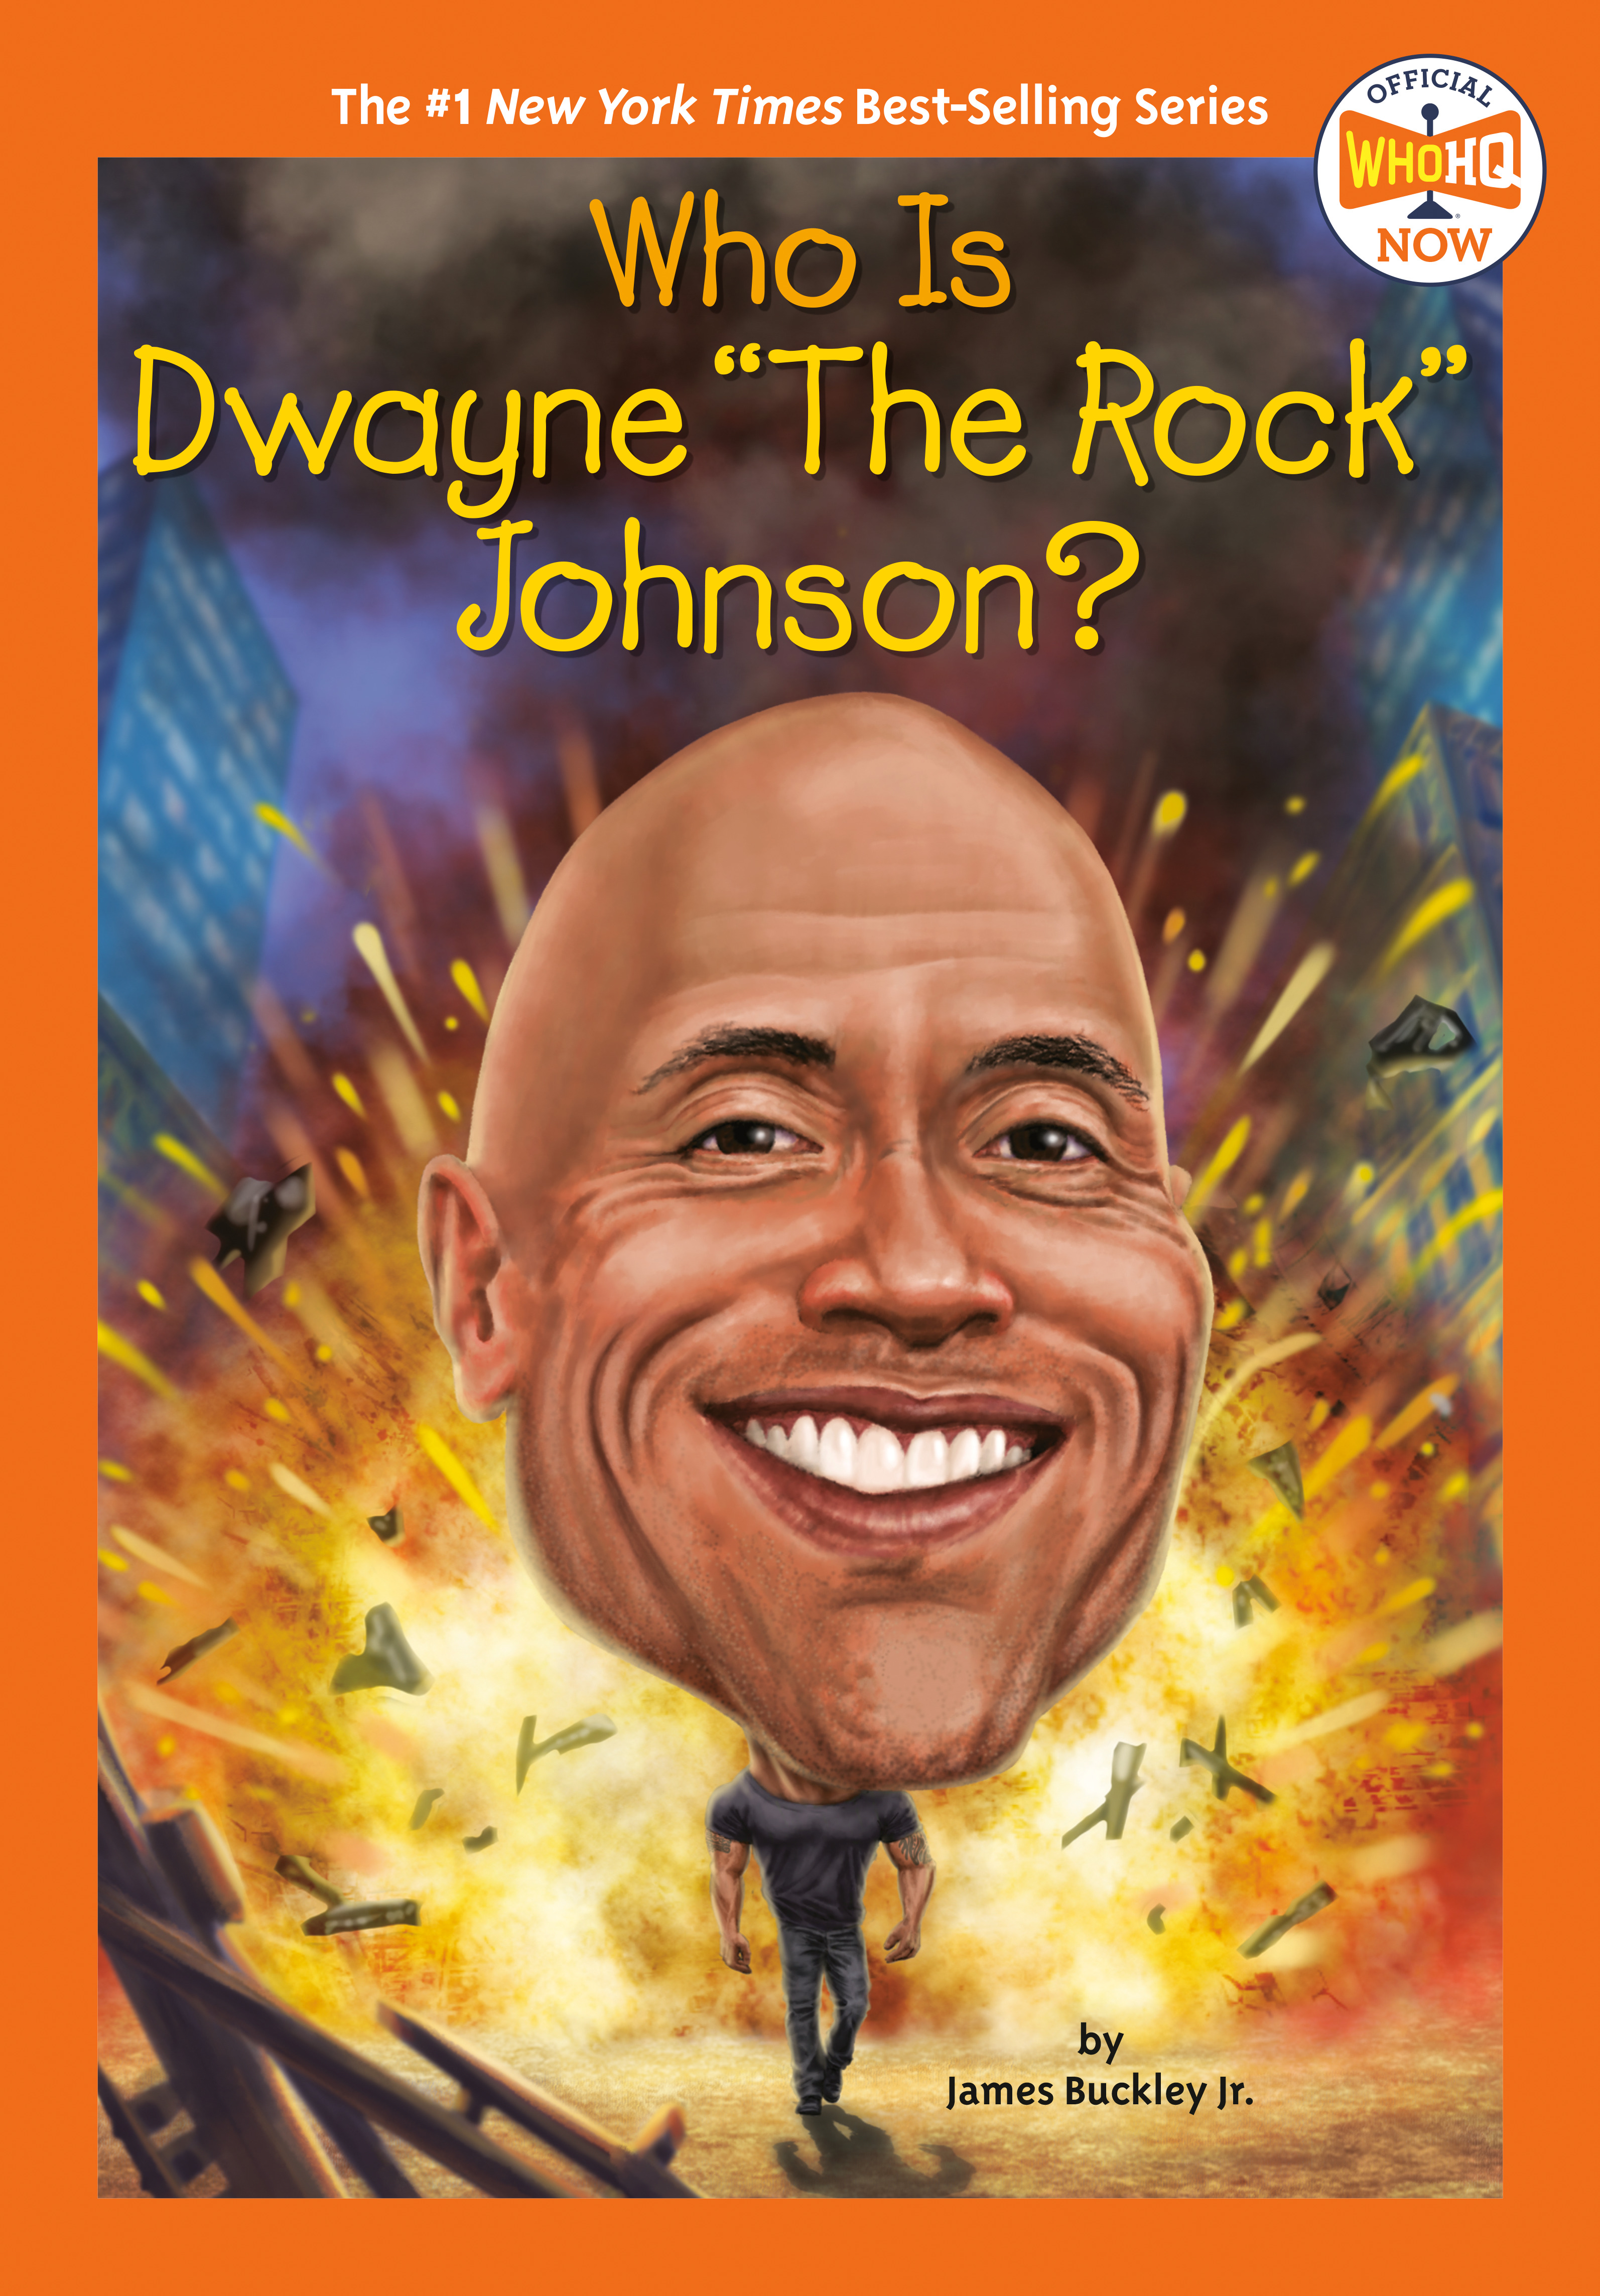 Who Is Dwayne "The Rock" Johnson? | Documentary